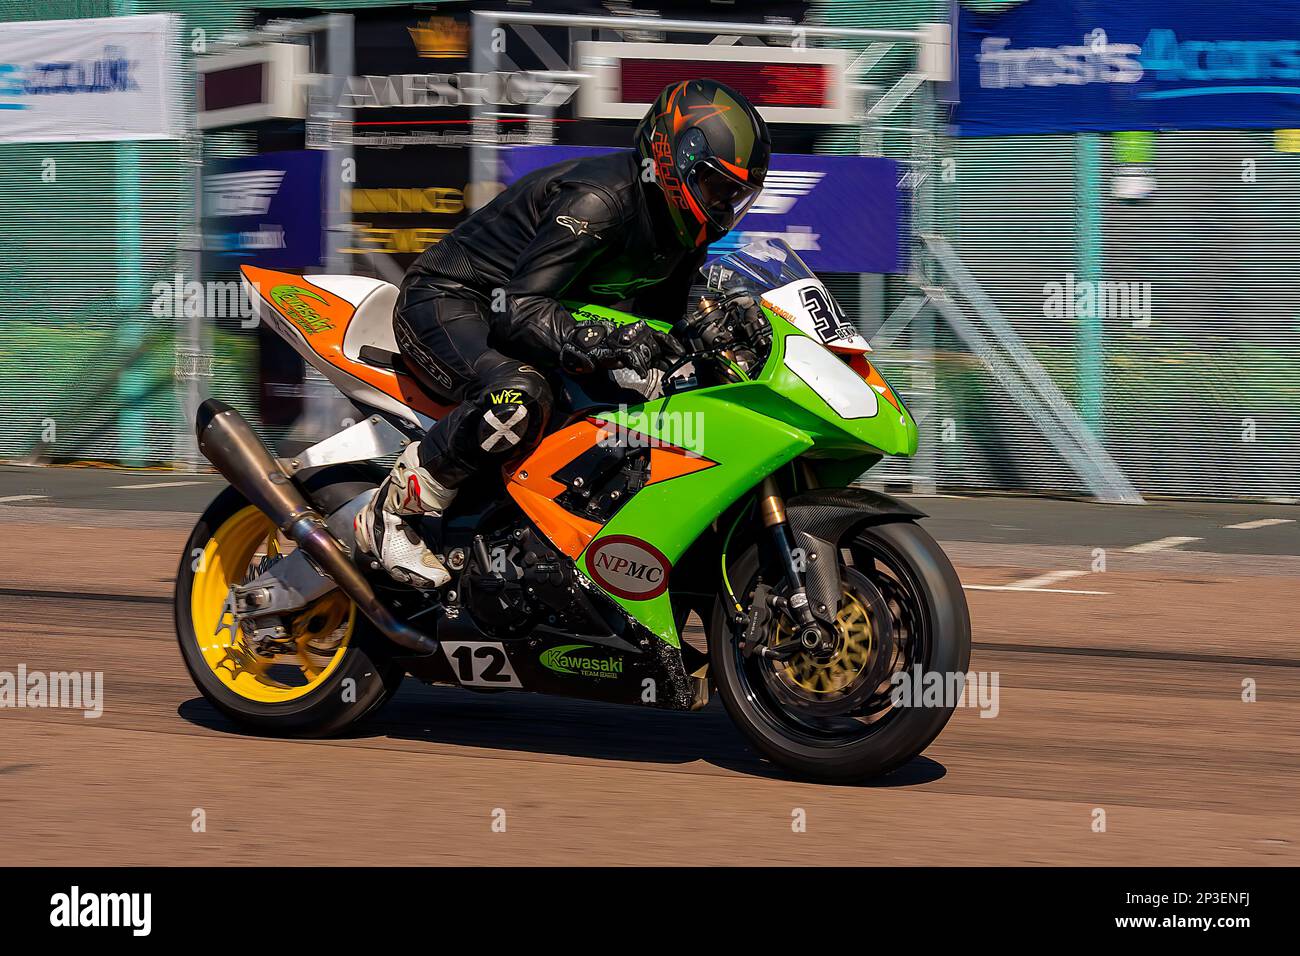 The event is currently run as a quarter mile sprint for both cars and motorcycles, held under the auspices of the Motor Sports Association. This image features Ben Marsden riding a Kawasaki ZX10R The event is organised by the Brighton and Hove Motor Club run along Madeira Drive, Brighton Sea Front, City of Brighton & Hove, UK. 1st September 2018 Stock Photo